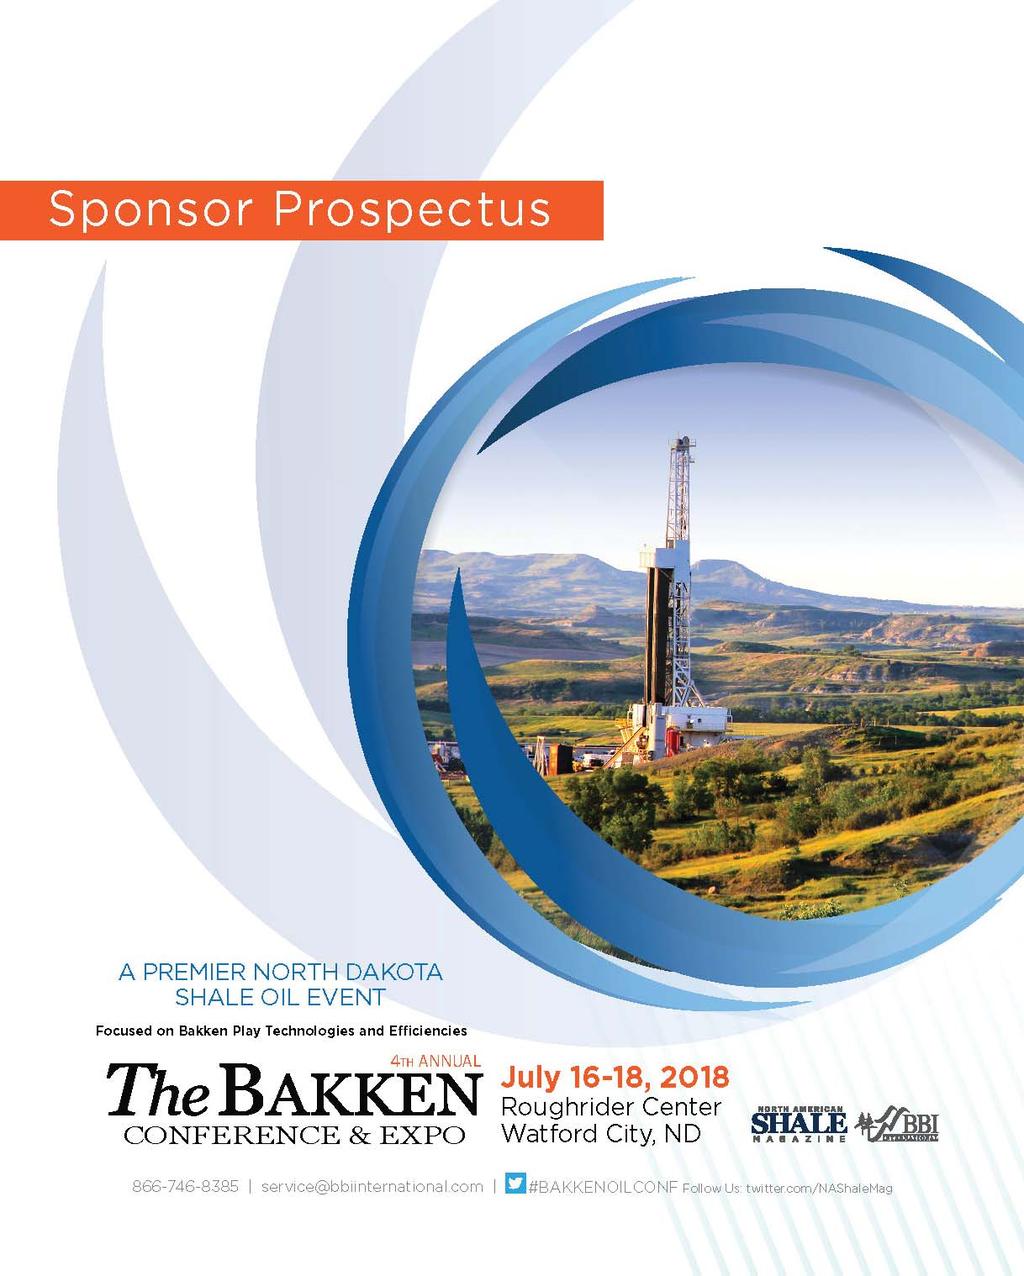 Sponsorships Cultivate Strong ROI As a sponsor of the 2018 The Bakken Conference & Expo, you will have an opportunity to position your organization as a leader and supporter of the shale oil